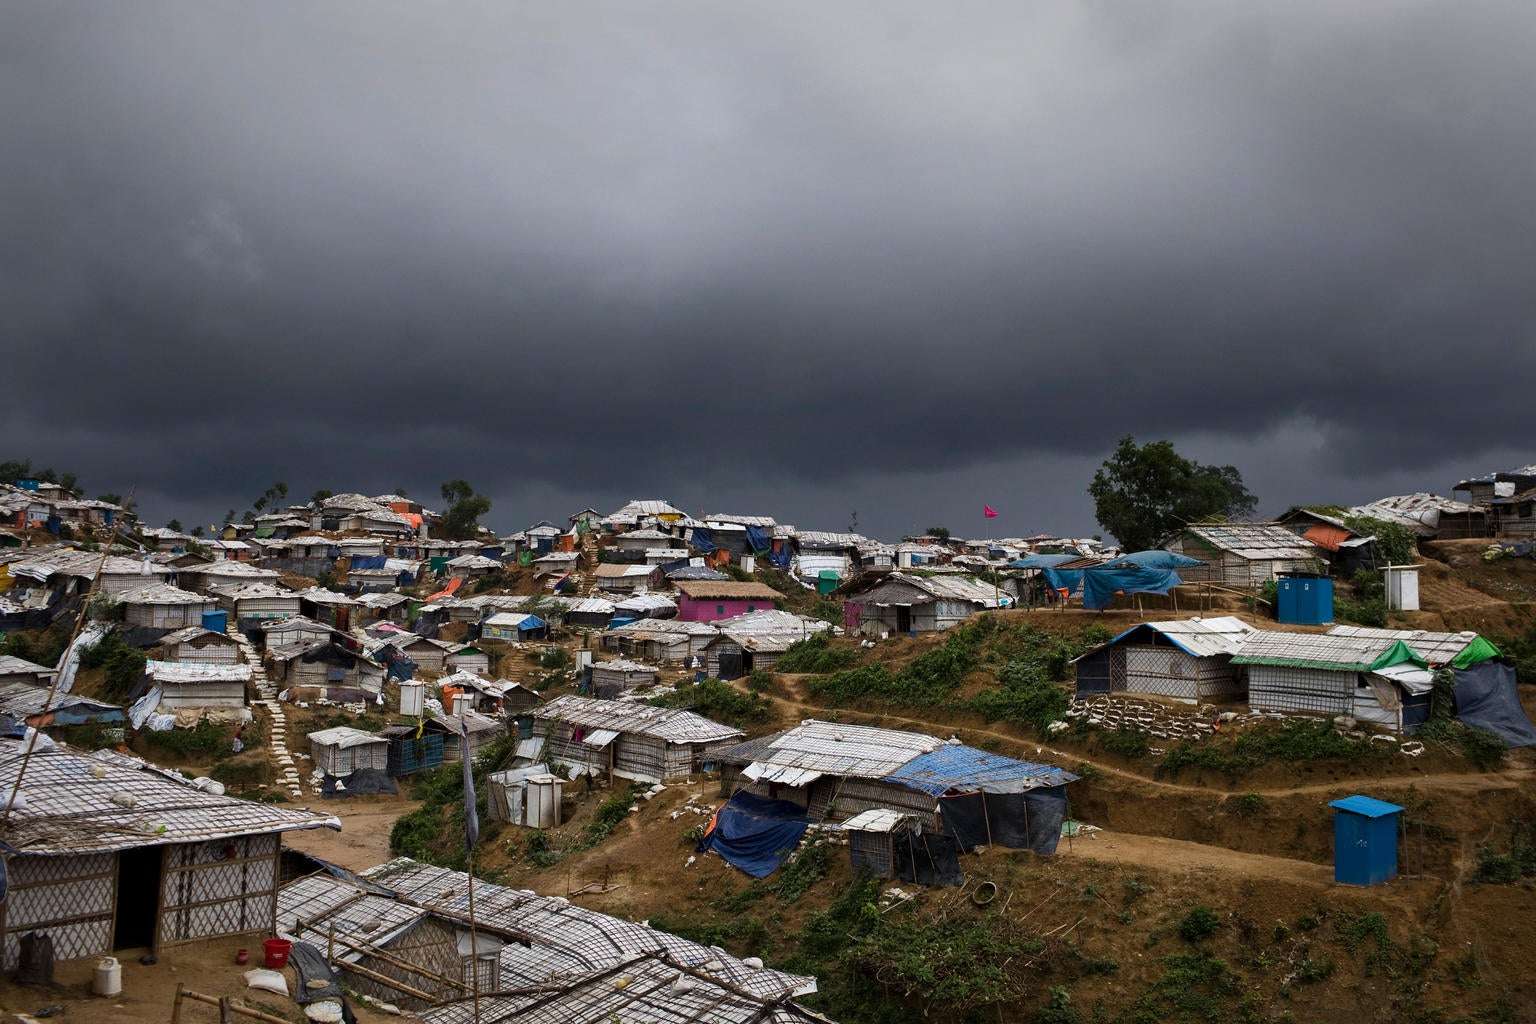 Rain clouds are seen approaching a part of the Balukhali-Kutupalong, a refugee camp sheltering over 800,000 Rohingya refugees, in Cox's Bazar, Bangladesh